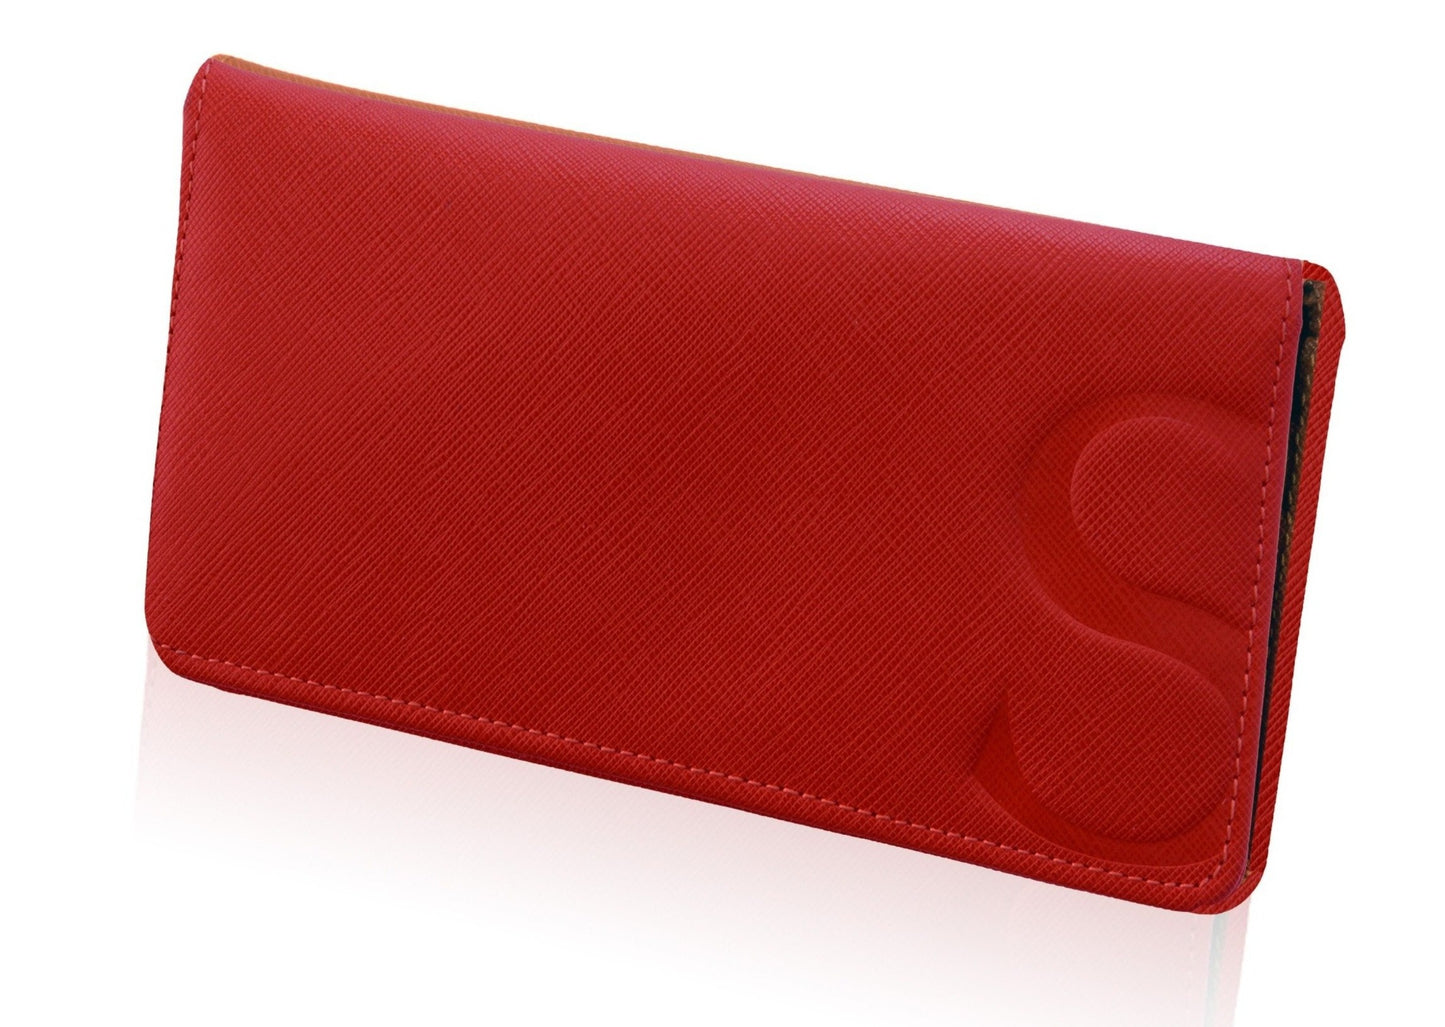 Slim Wallet in Red Textured Leather